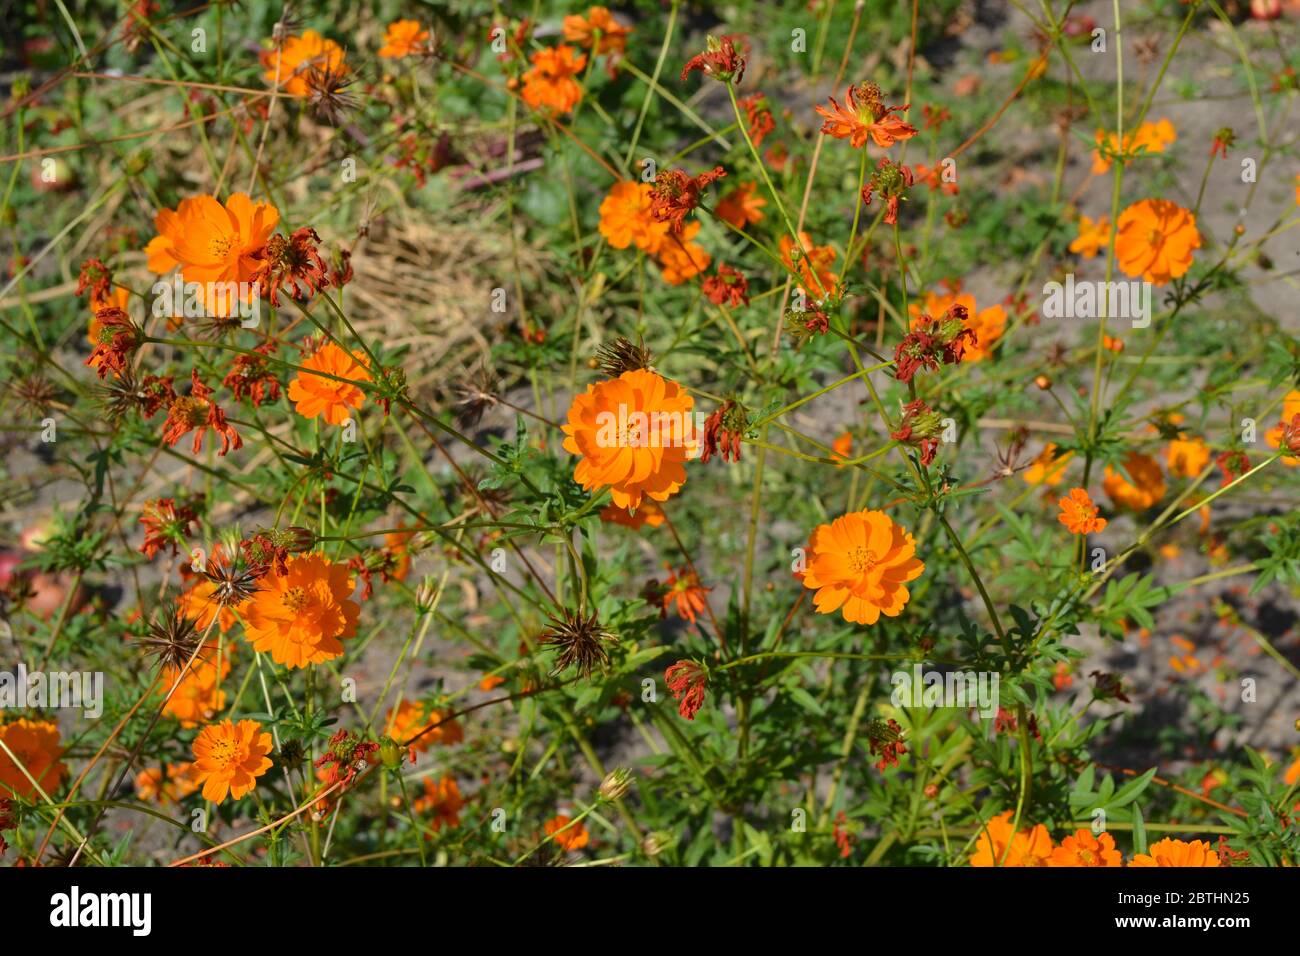 Sunny. Homemade. Cosmos, a genus of annual and perennial herbaceous plants of the family Asteraceae. Orange flowers Stock Photo